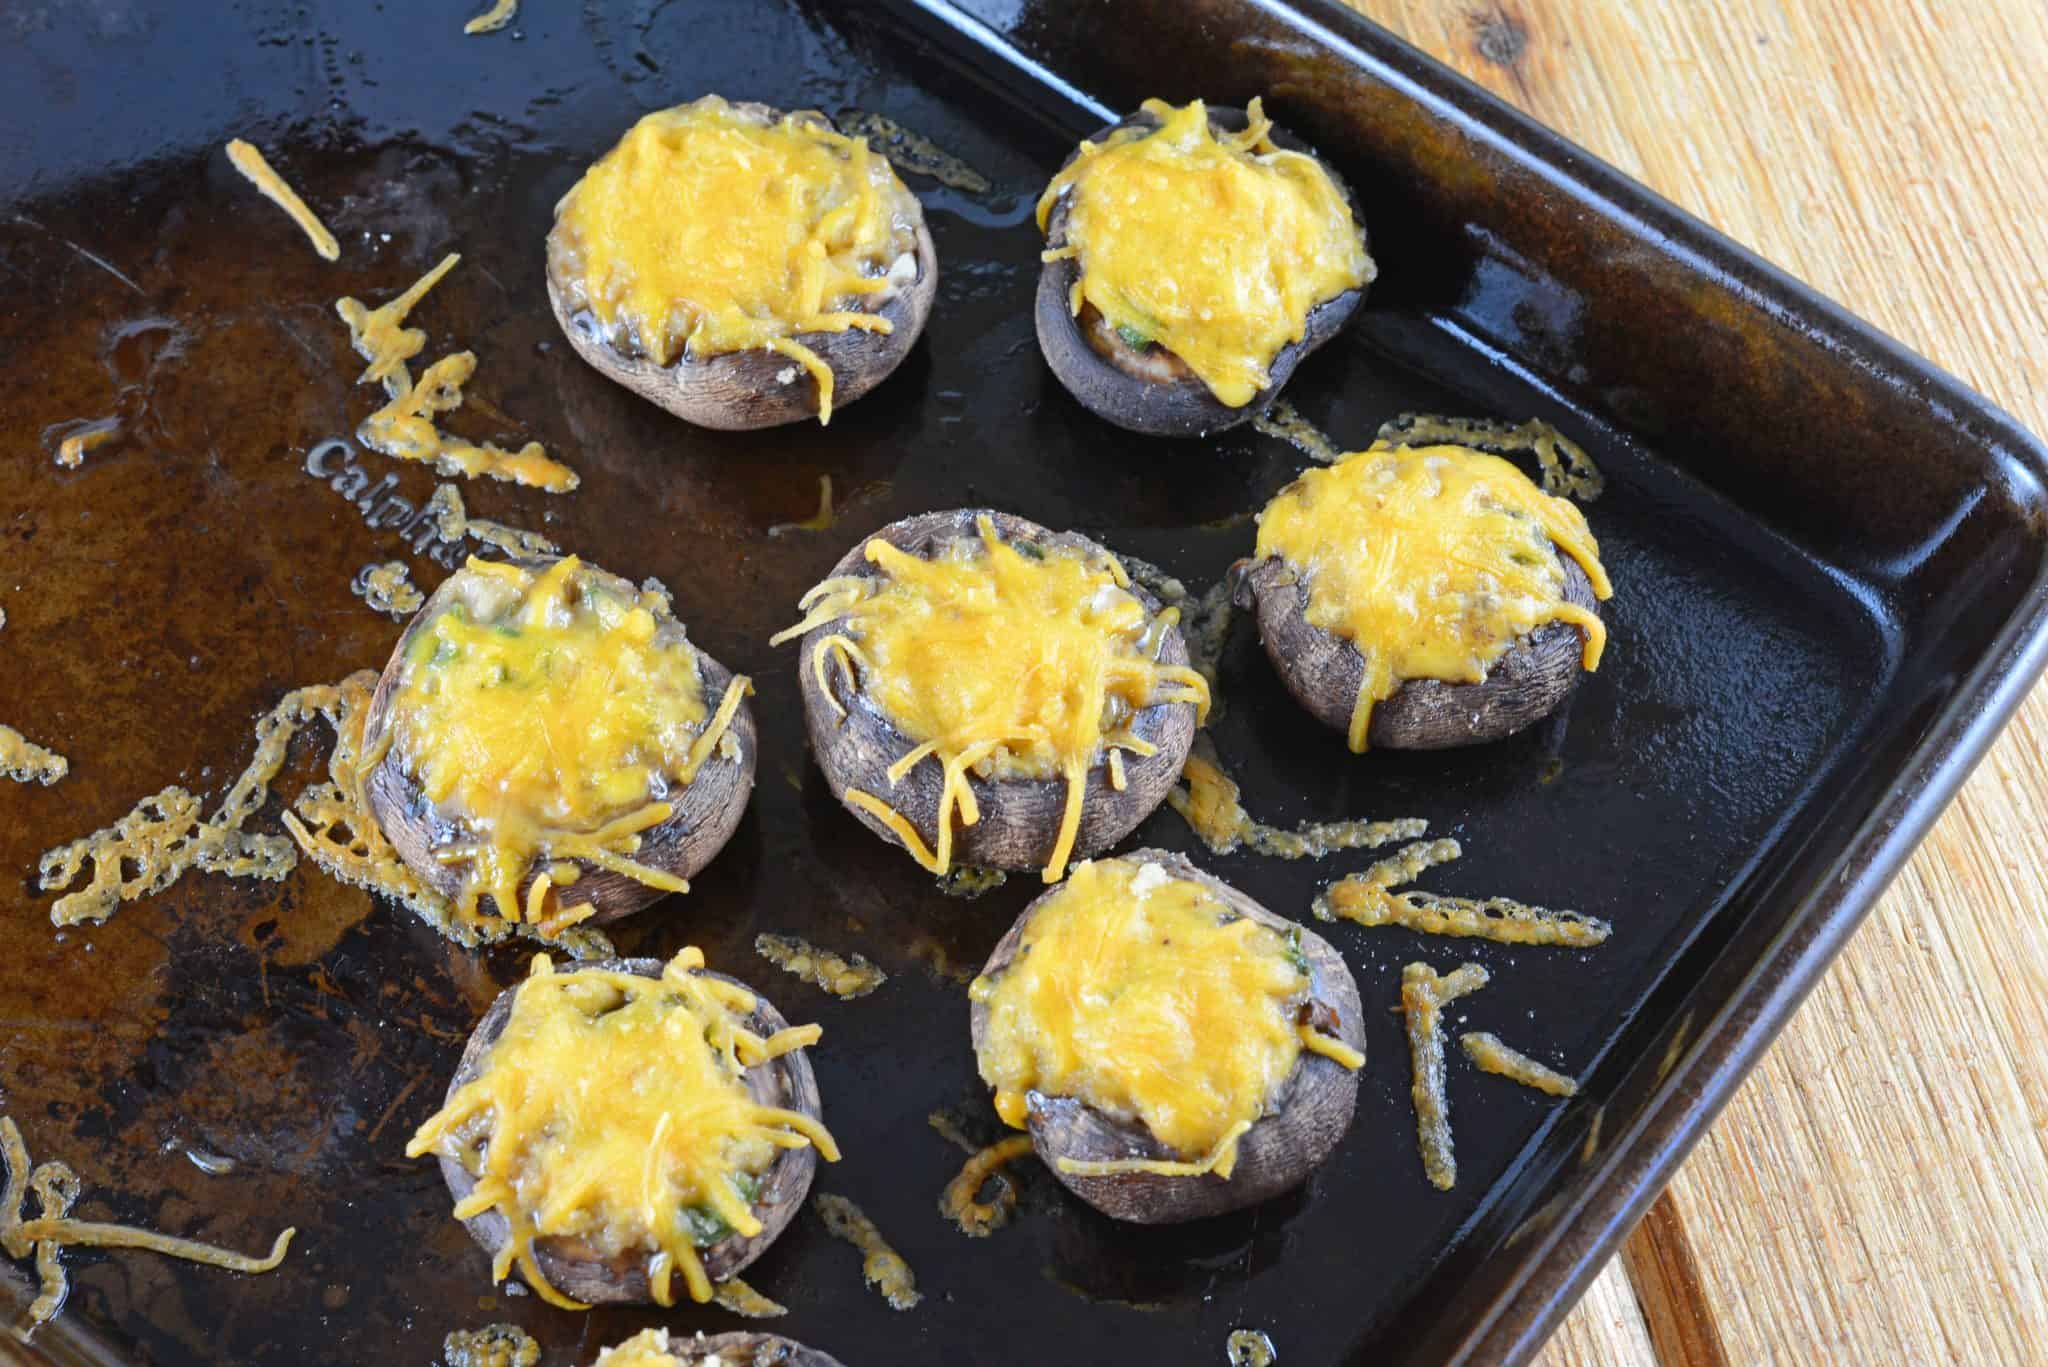 Creamy Jalapeno Stuffed Mushrooms are an easy jalapeno popper make ahead recipe using cream cheese and fresh jalapenos. The perfect party appetizer! #stuffedmushrooms #jalapenopopperrecipes #makeaheadappetizers www.savoryexperiments.com 